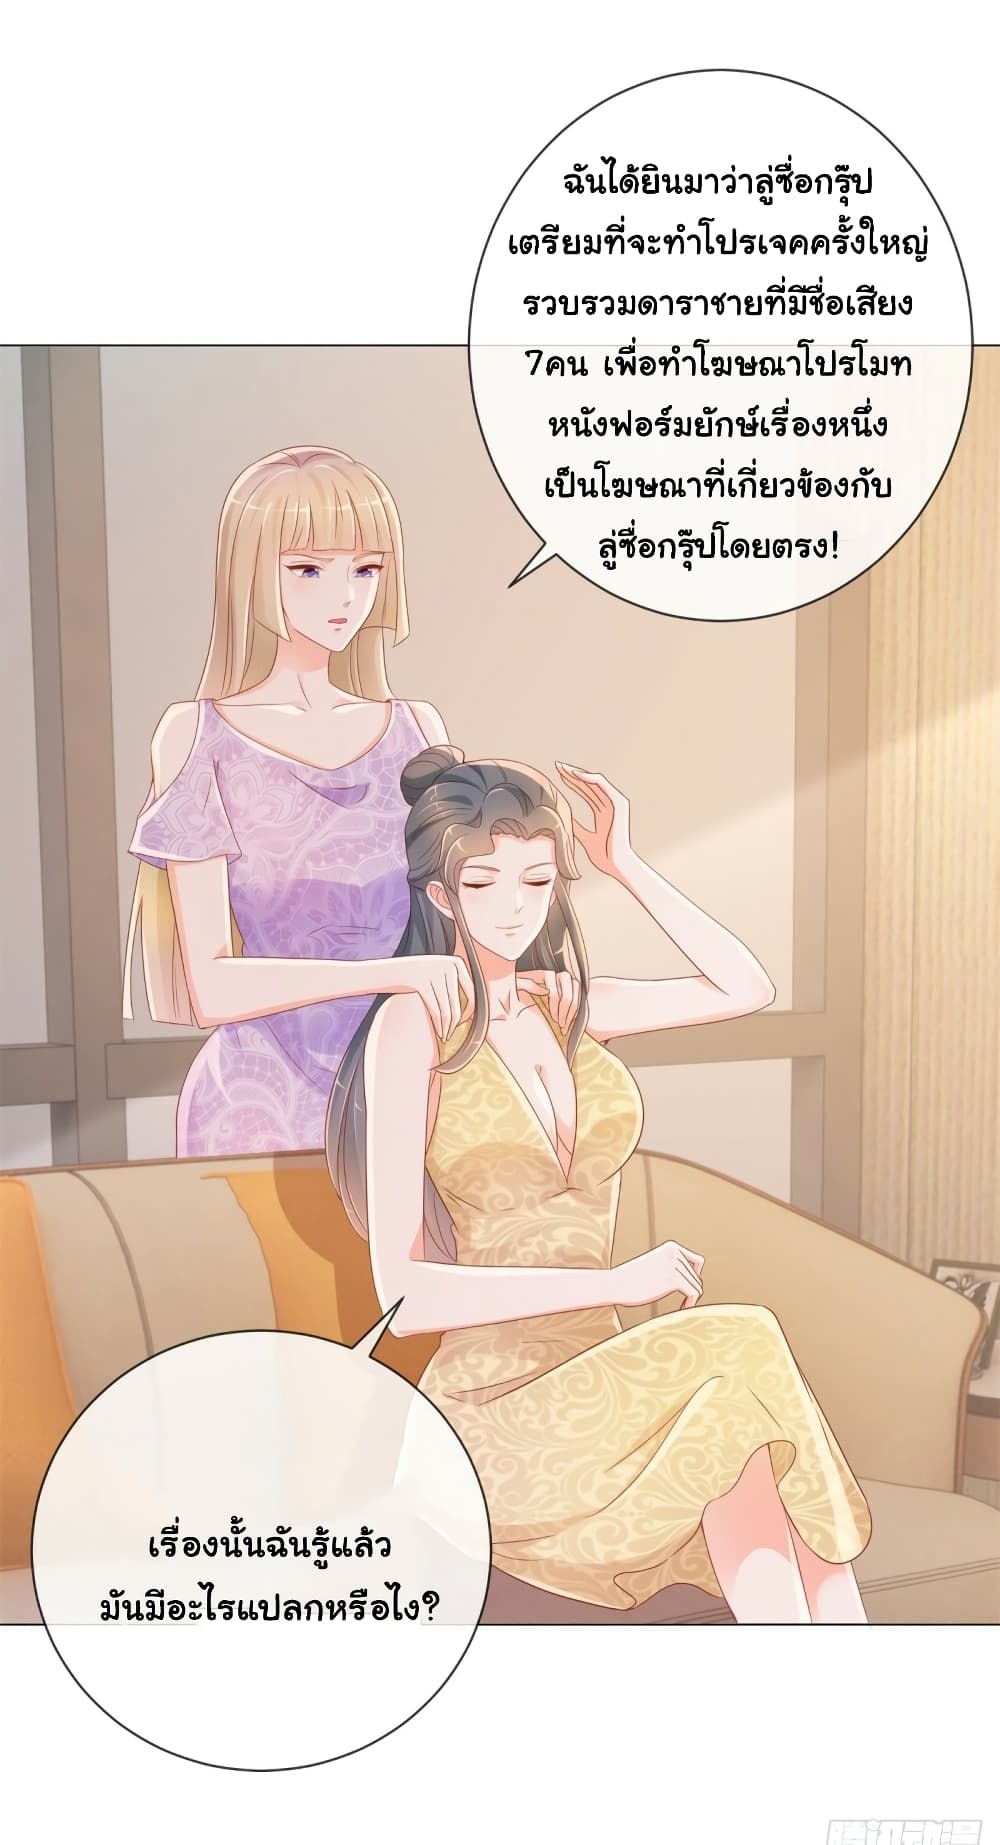 The Lovely Wife And Strange Marriage à¹à¸œà¸™à¸£à¸±à¸à¸¥à¸§à¸‡à¹ƒà¸ˆ 322 (3)